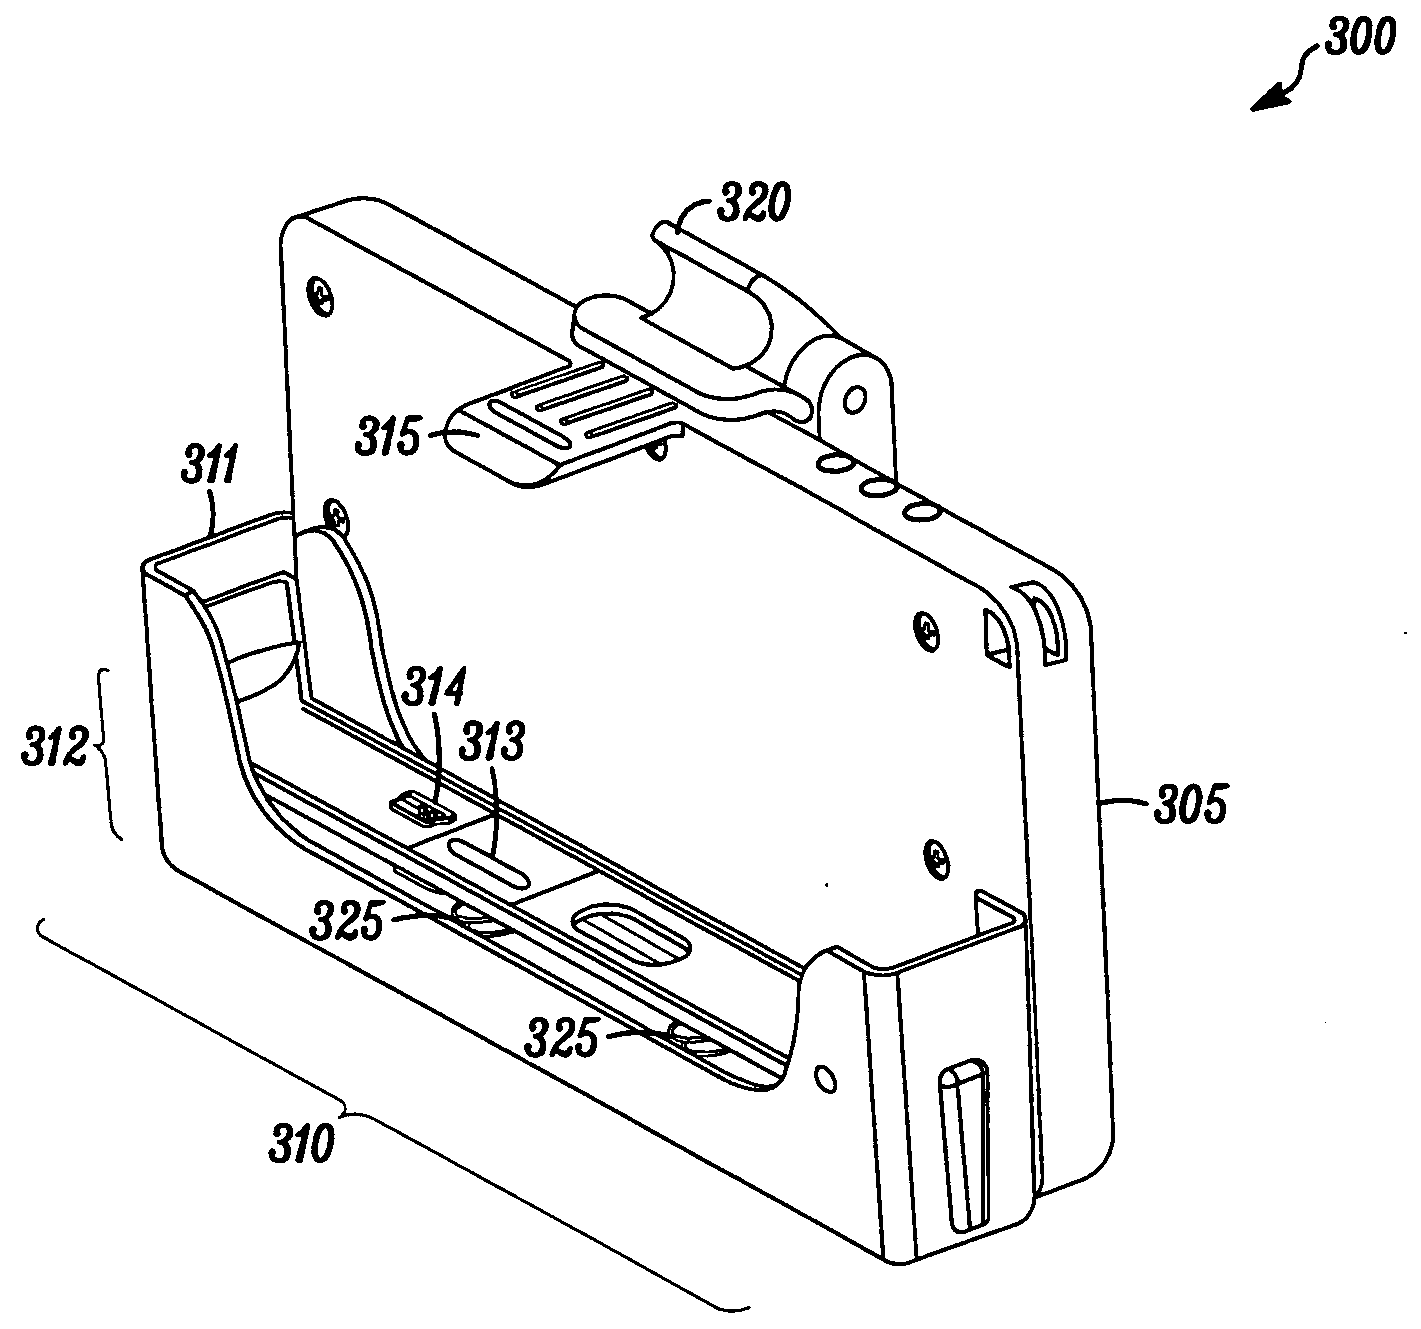 Portable and universal hybrid-charging apparatus for portable electronic devices